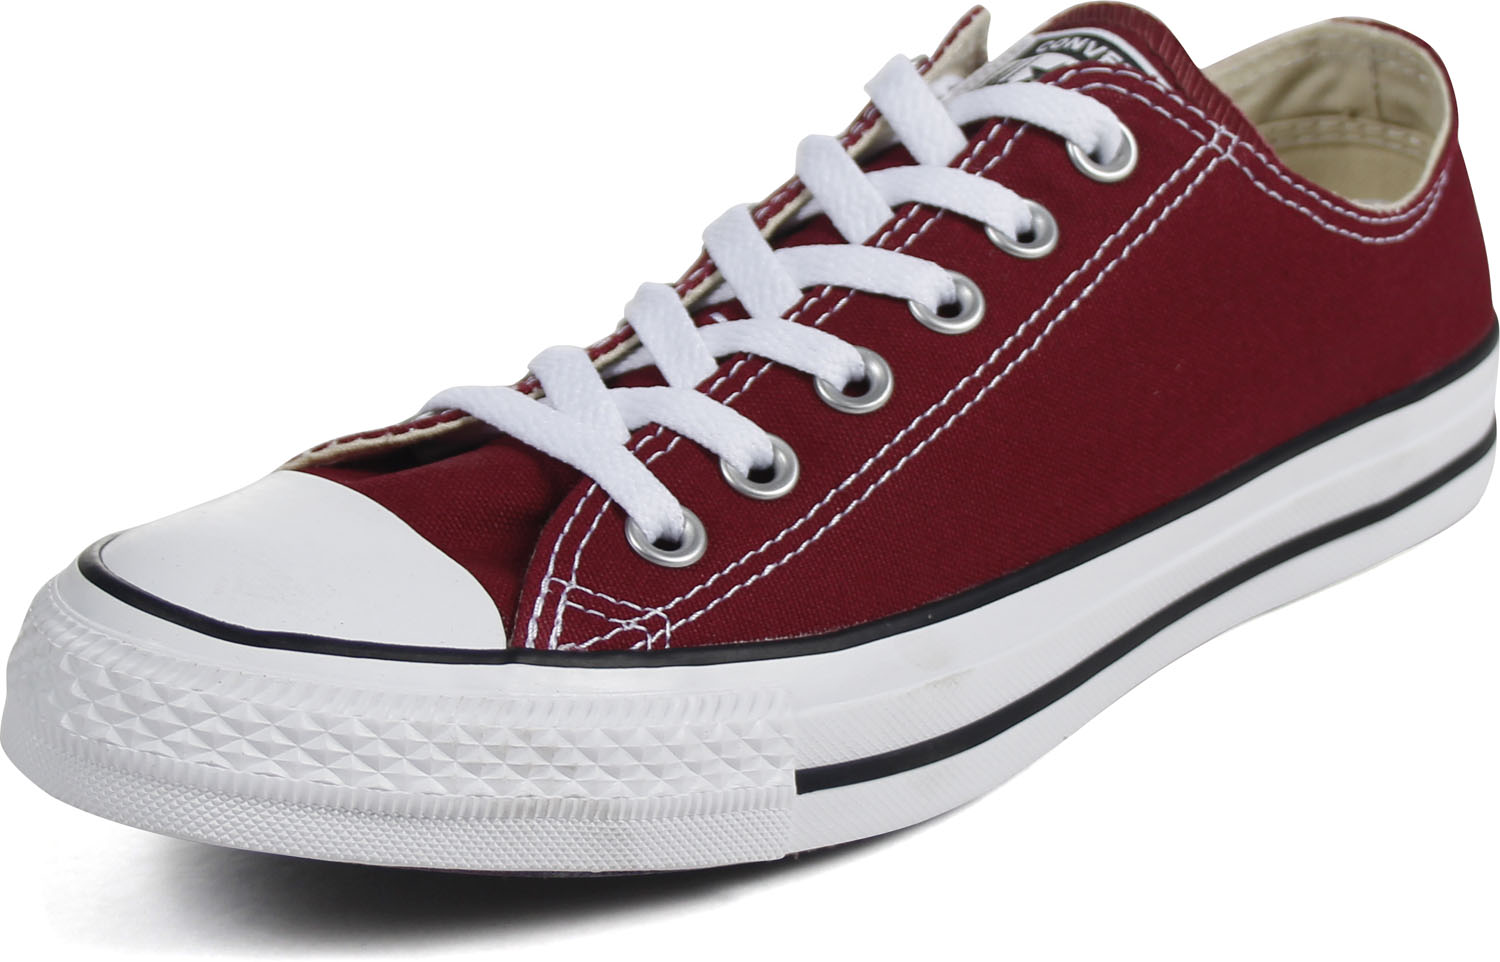 Related Grant Sculpture Converse Chuck Taylor Maroon Low Top Shoes (M9691)